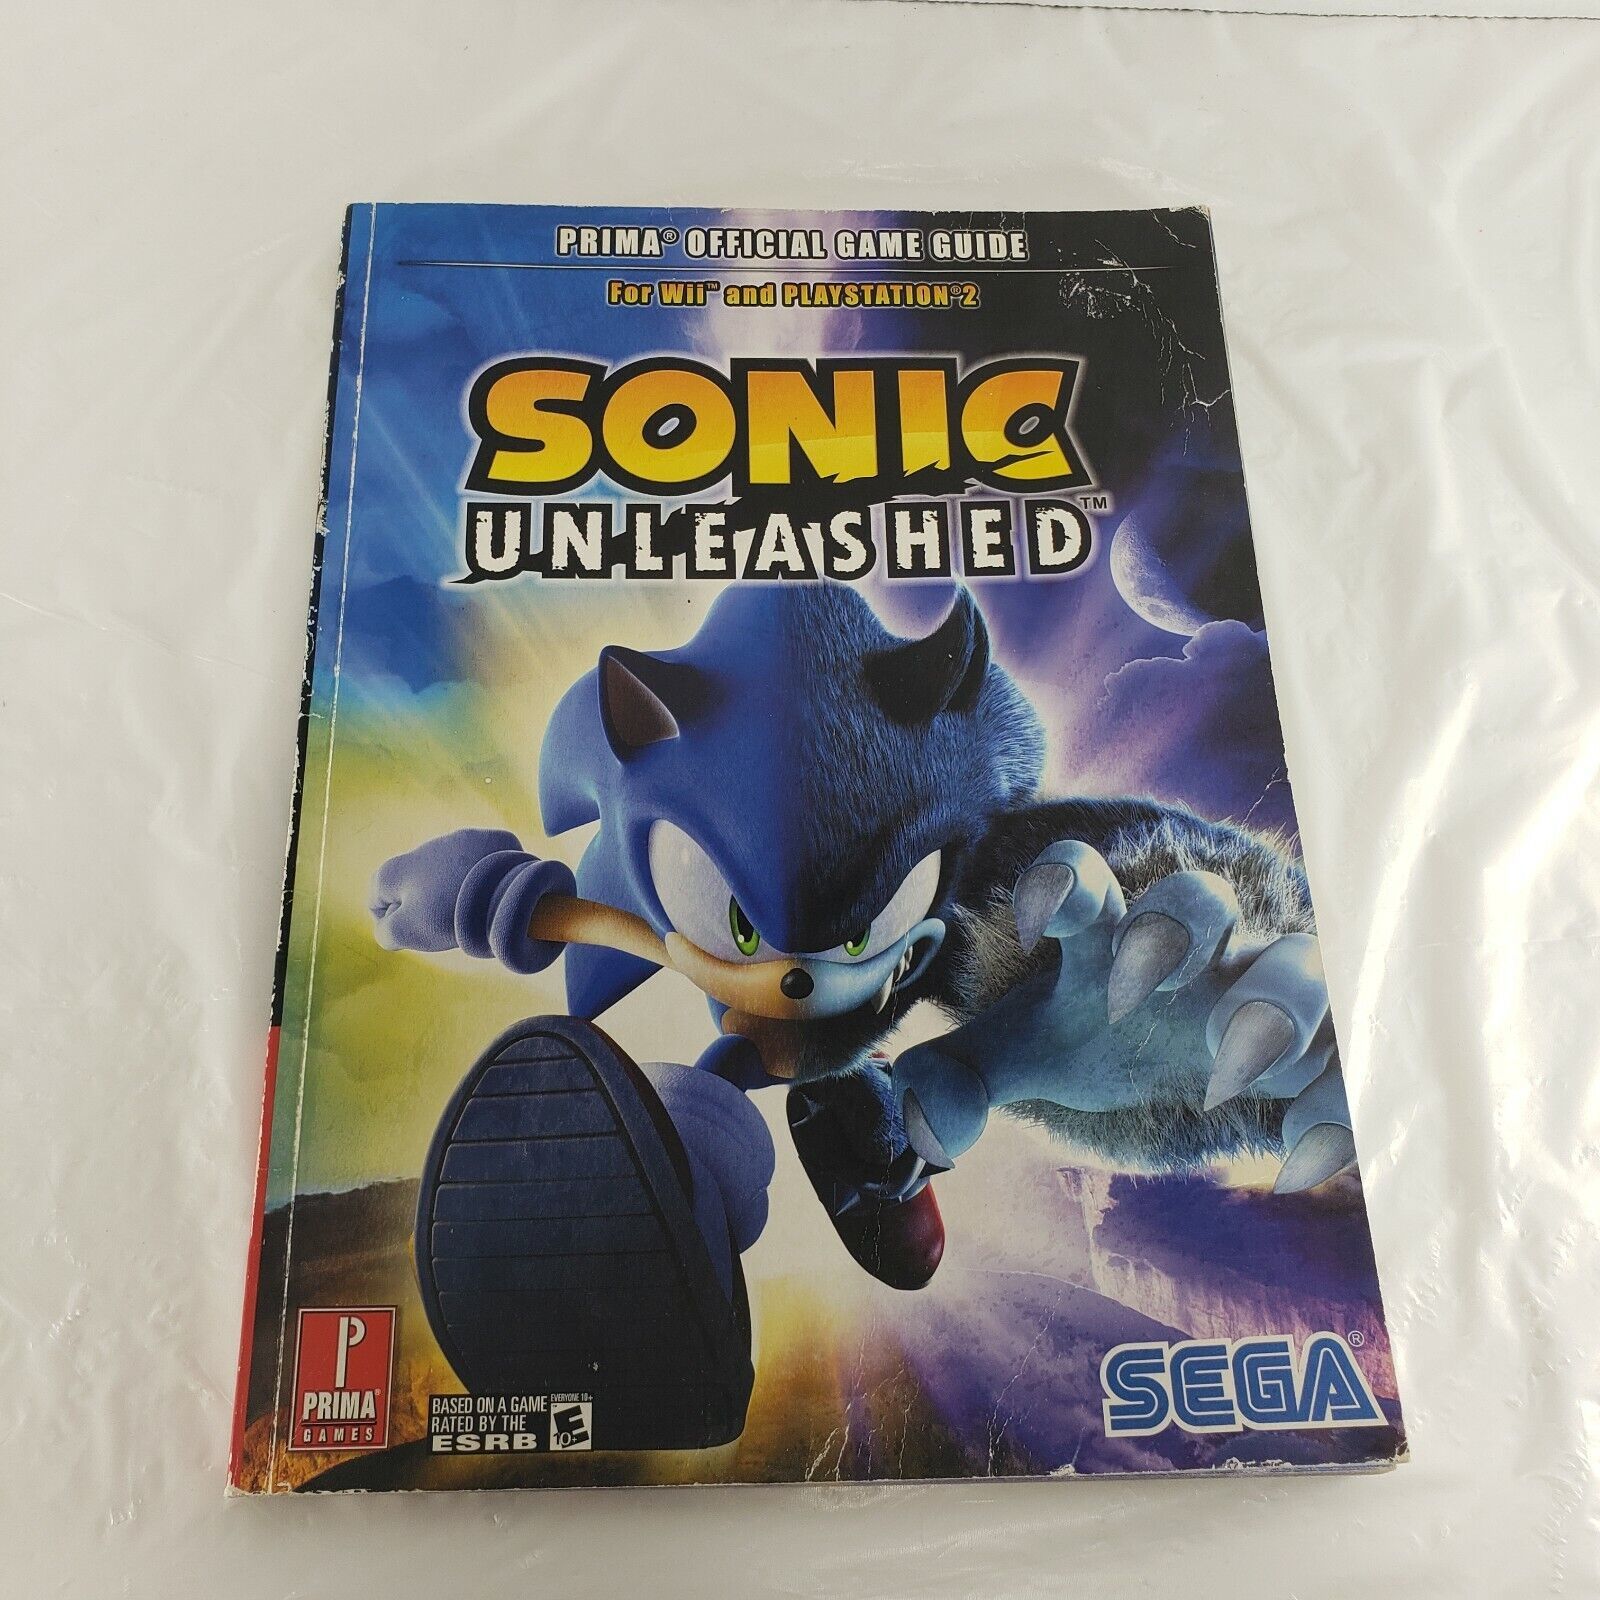 Primary image for Prima Official Game Guide - SONIC UNLEASHED (Wii/PS2) Nintendo Playstation Sega